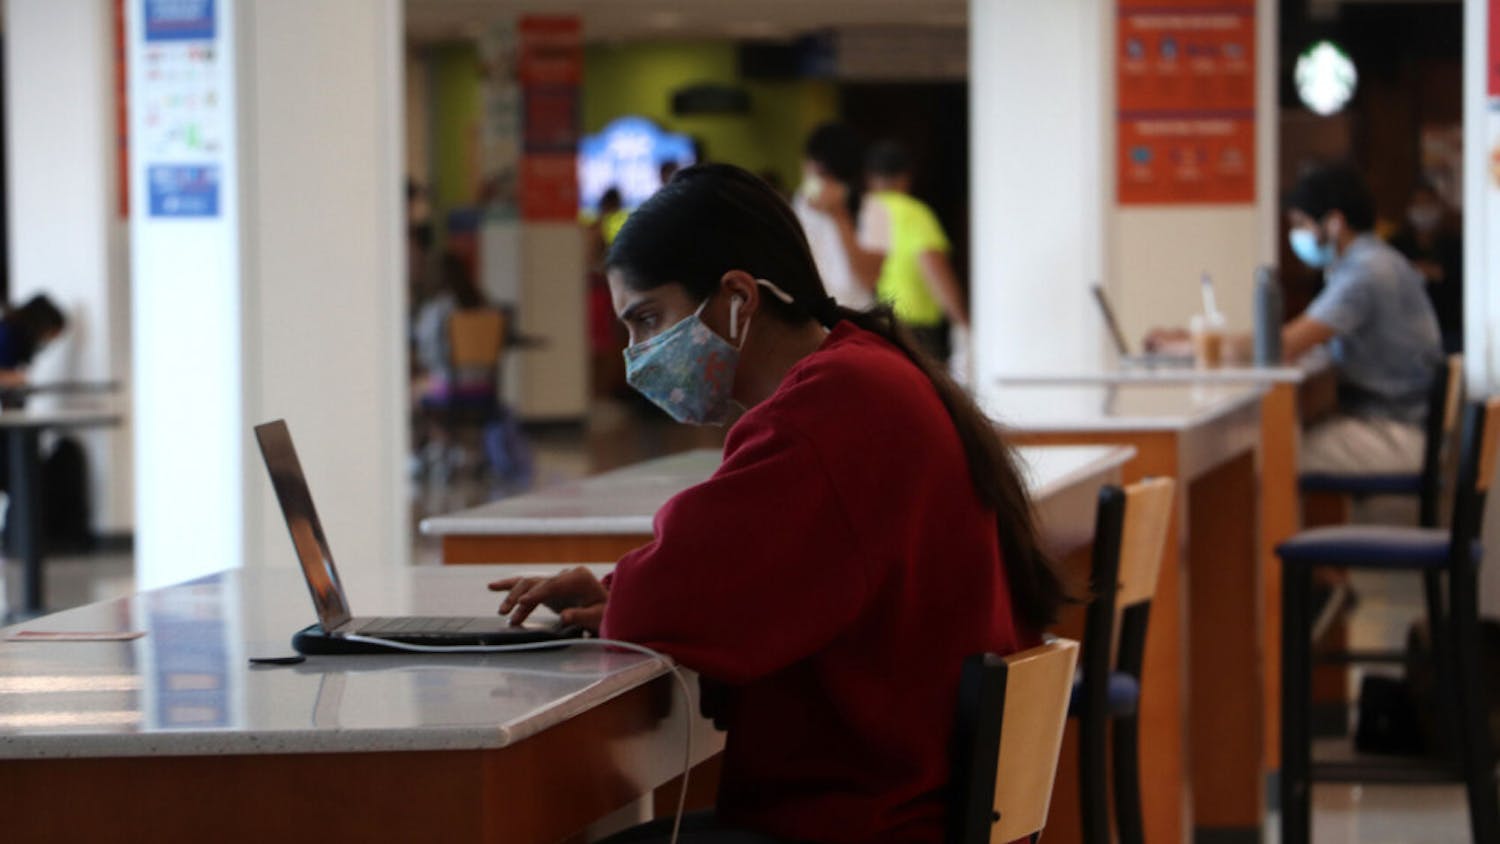 Pia Nair, 19, a UF second-year psychology student, takes a quiz in the Reitz Student Union on Thursday, Sept. 17, 2020.